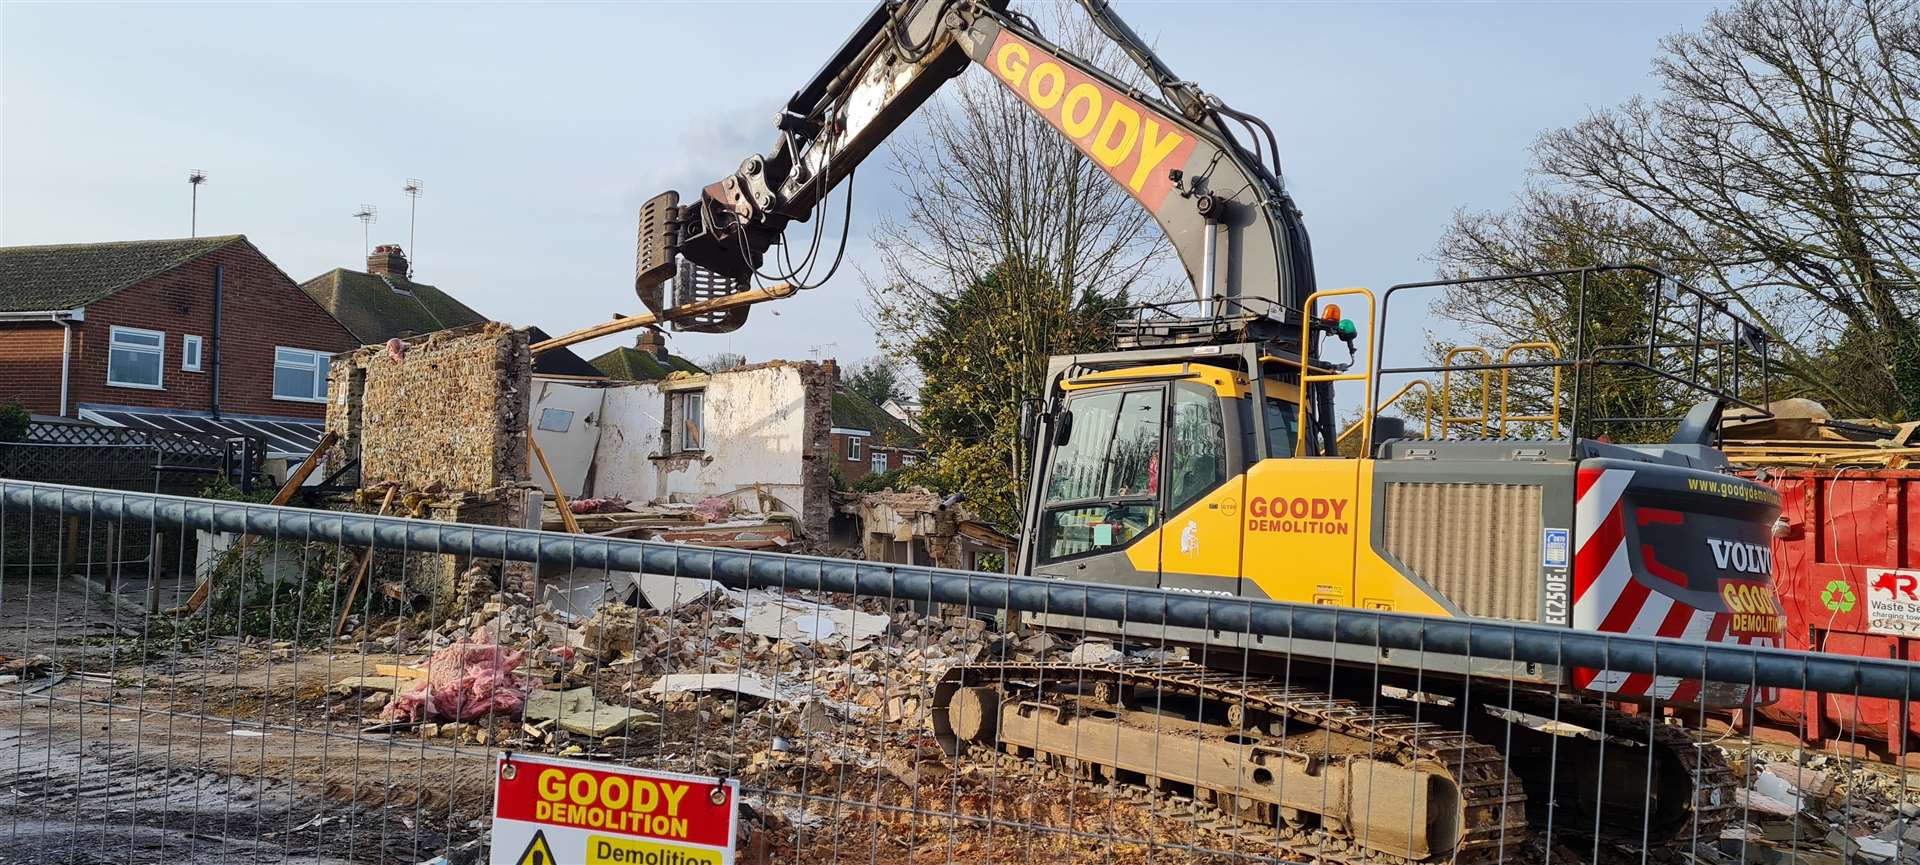 The Orb pub in Margate has been demolished